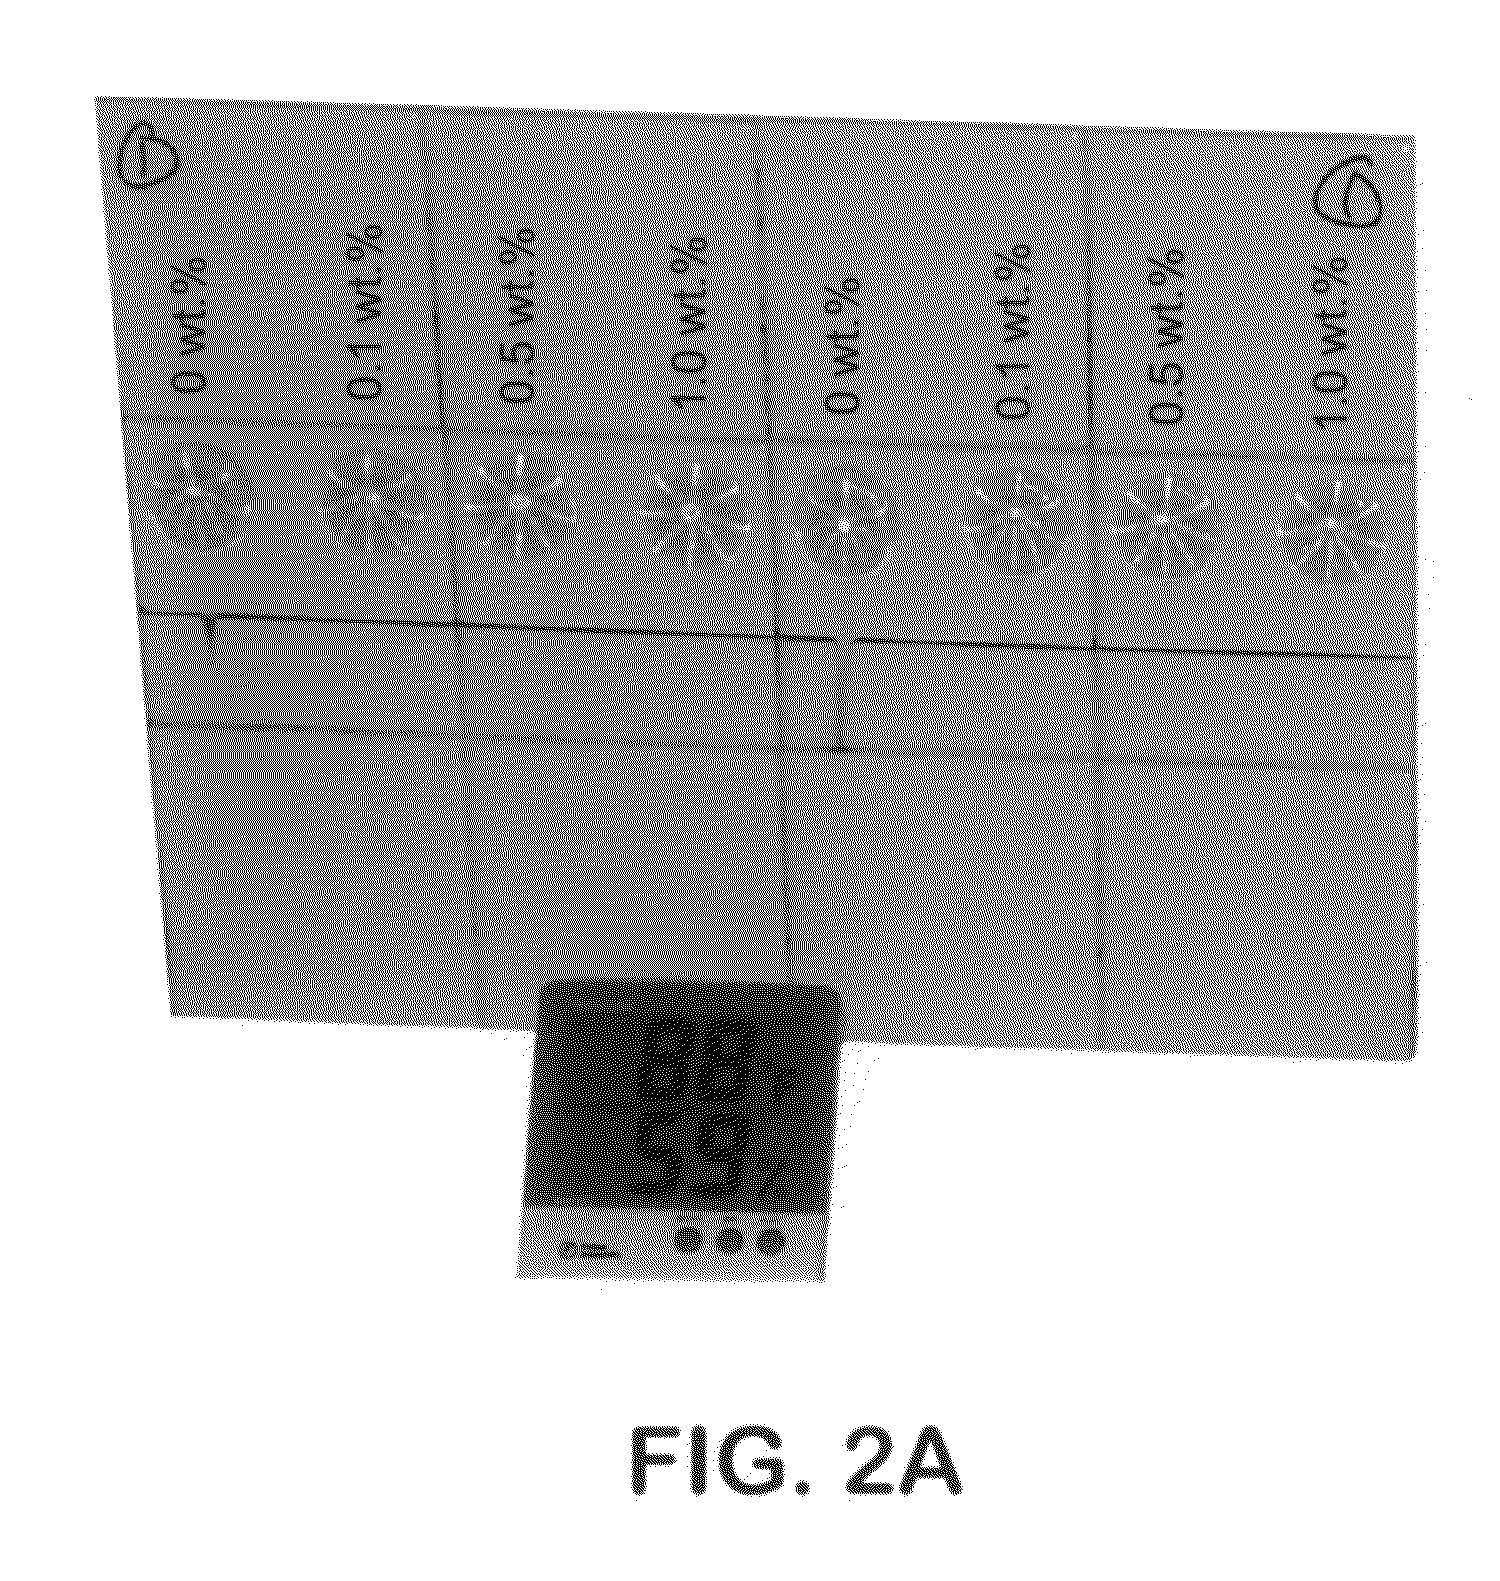 Cleaning composition having high self-adhesion and providing residual benefits